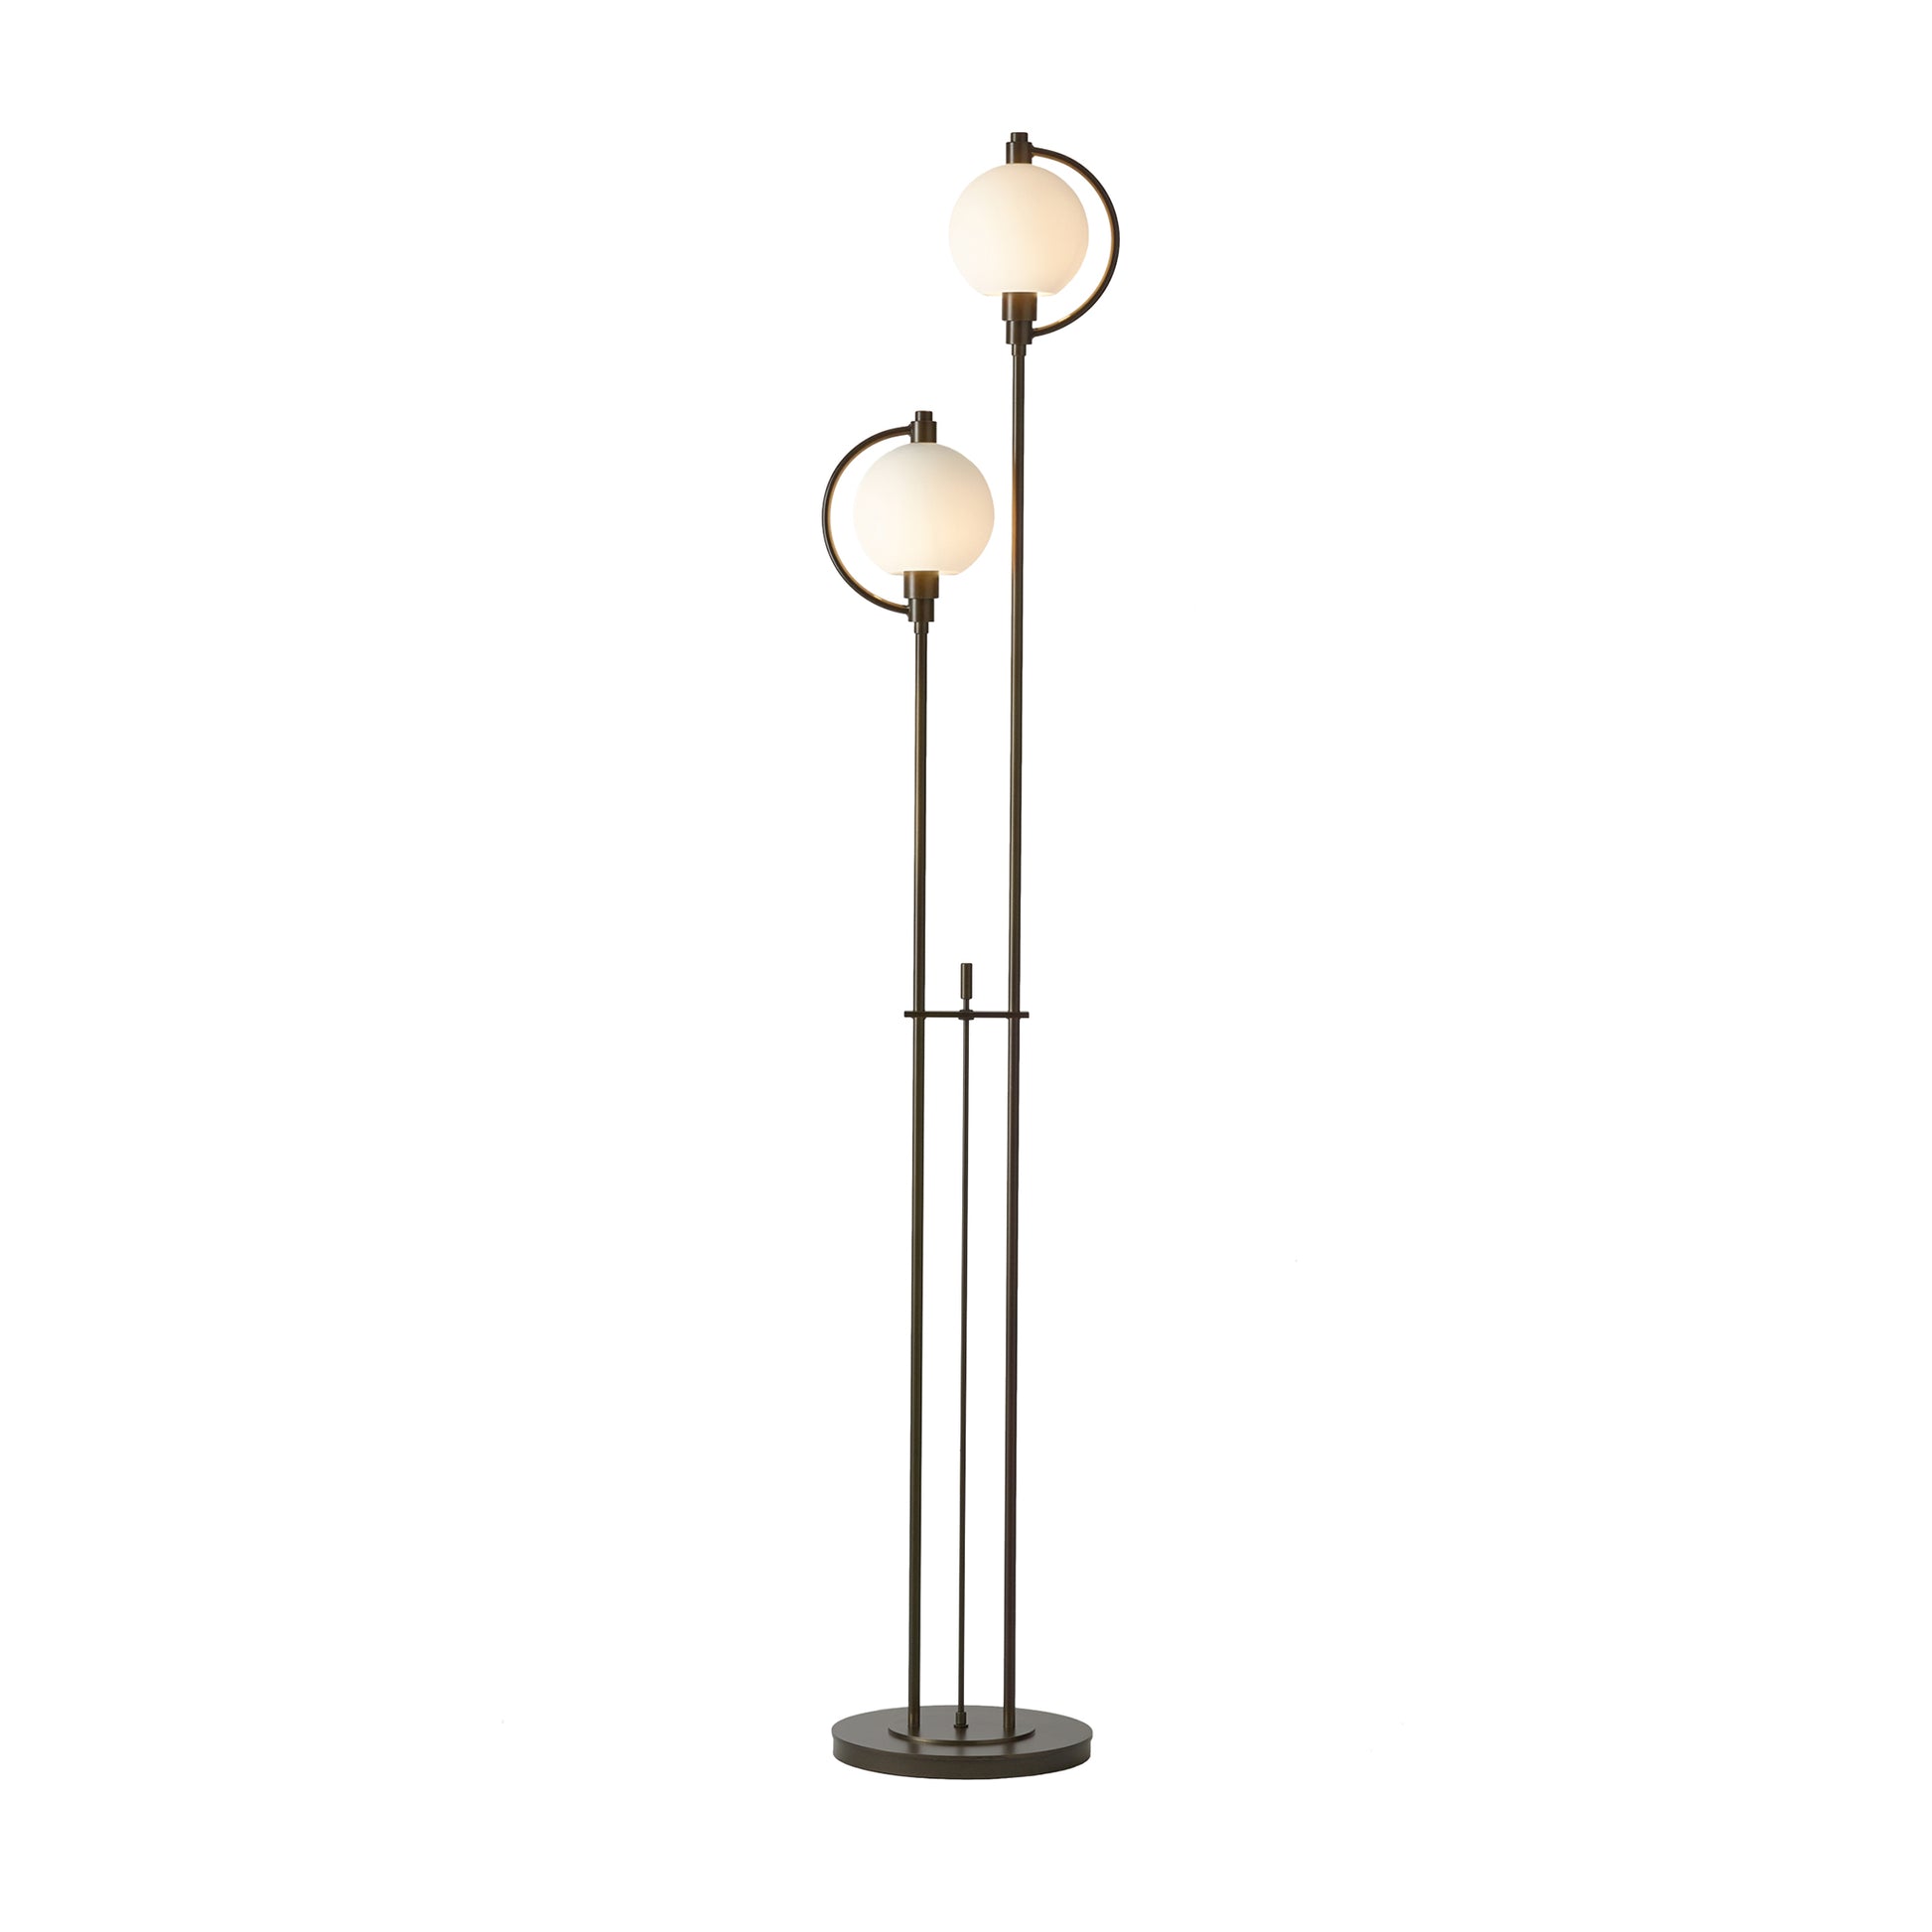 The handcrafted Pluto floor lamp from Hubbardton Forge features two elegant glass globes.